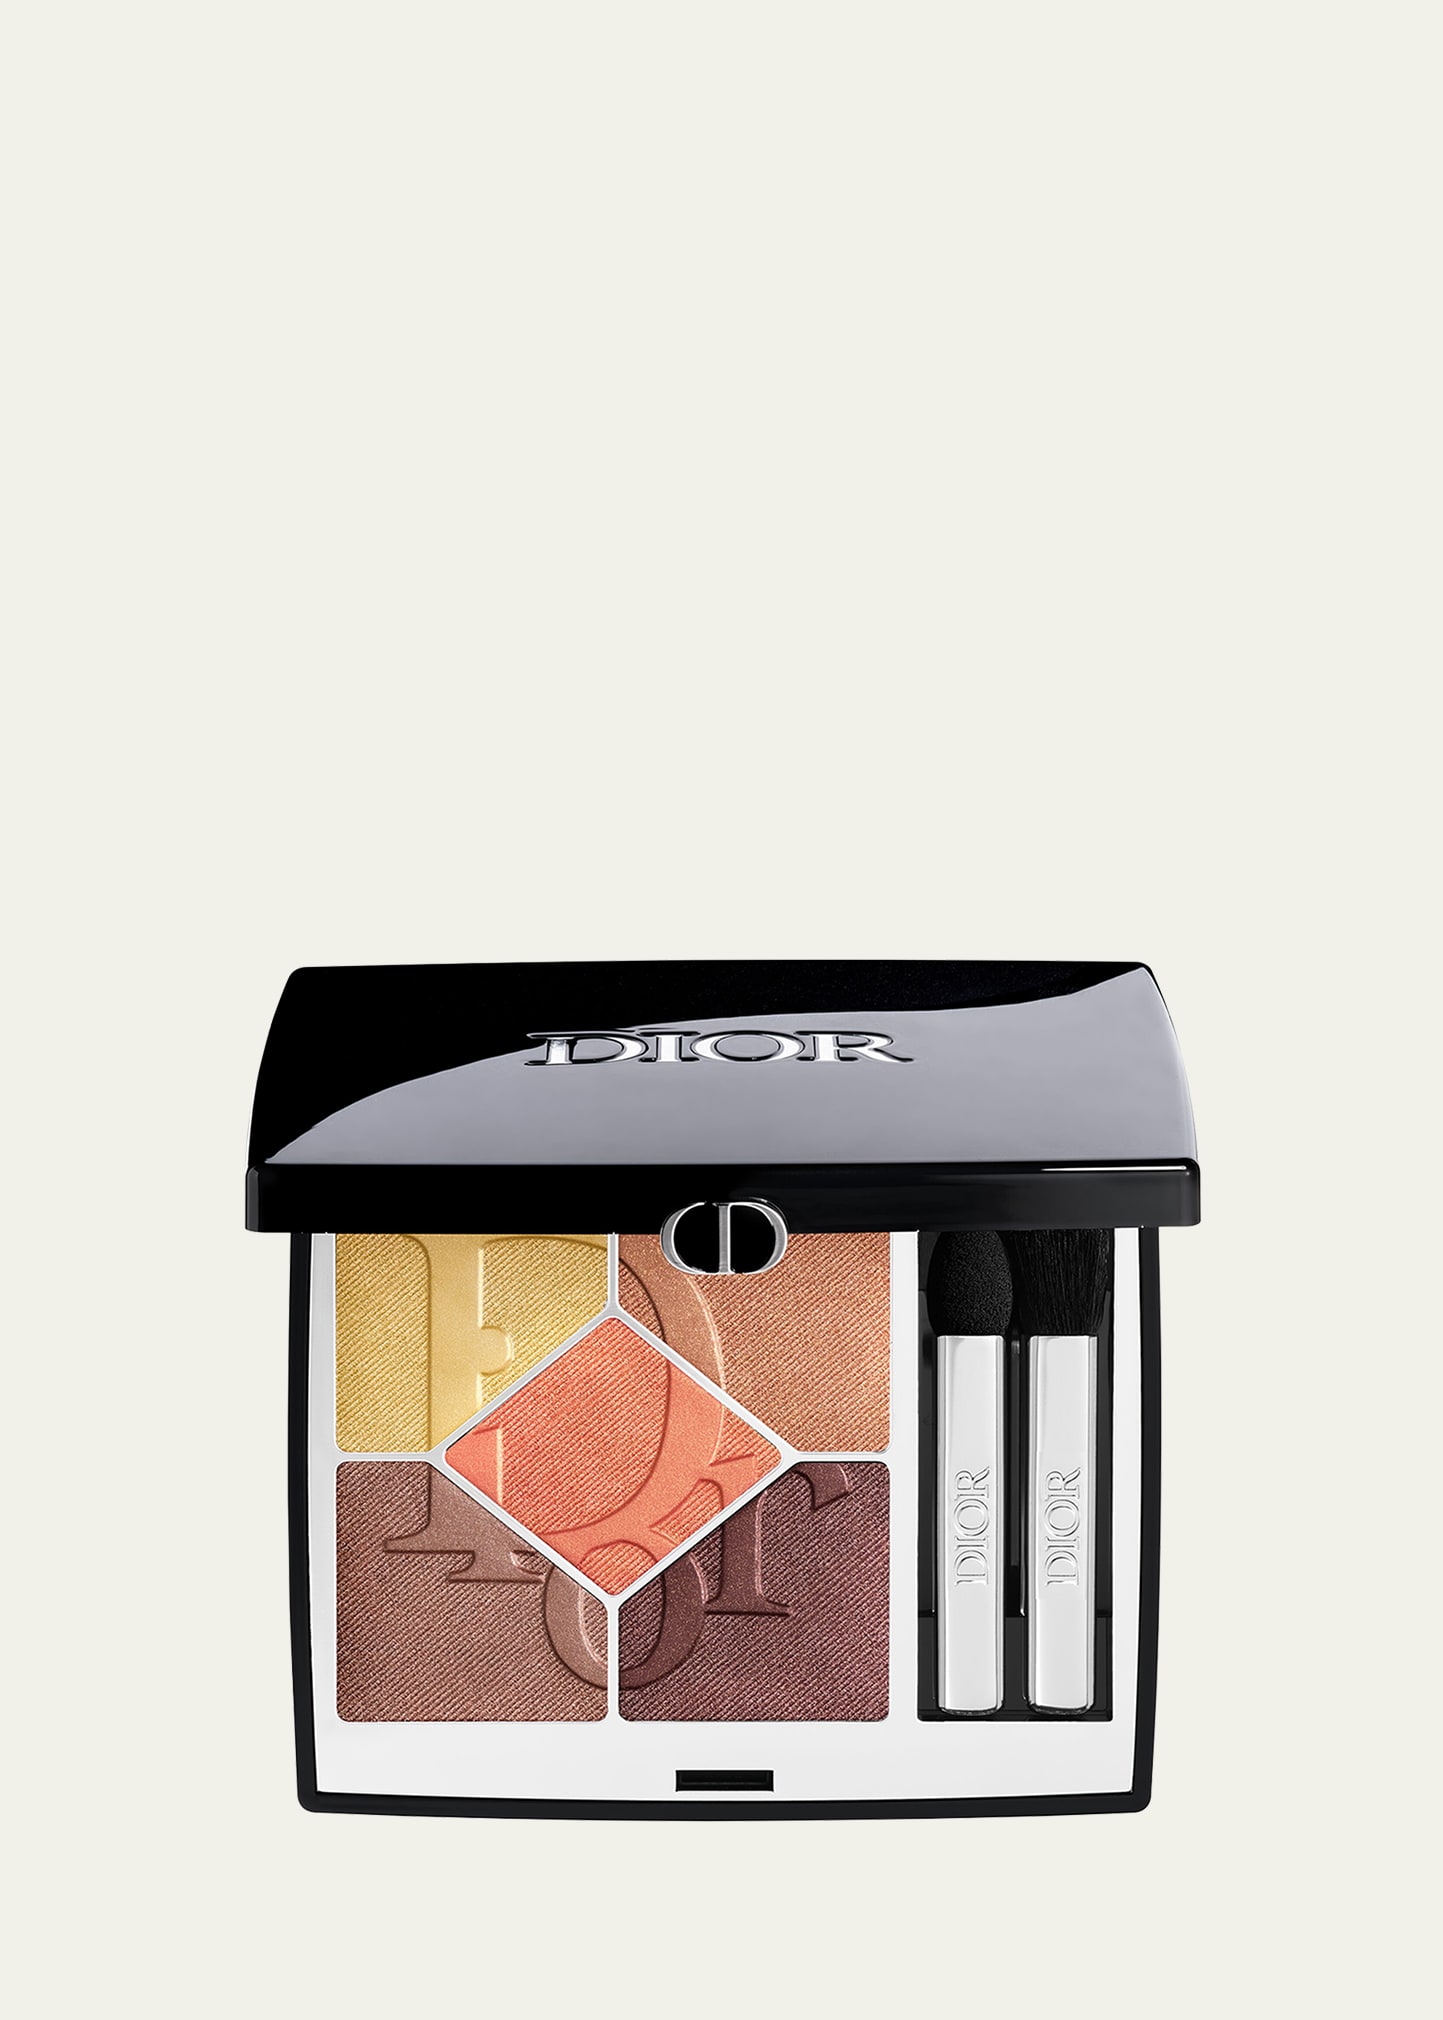 Limited Edition Diorshow Couture Eyeshadow Palette